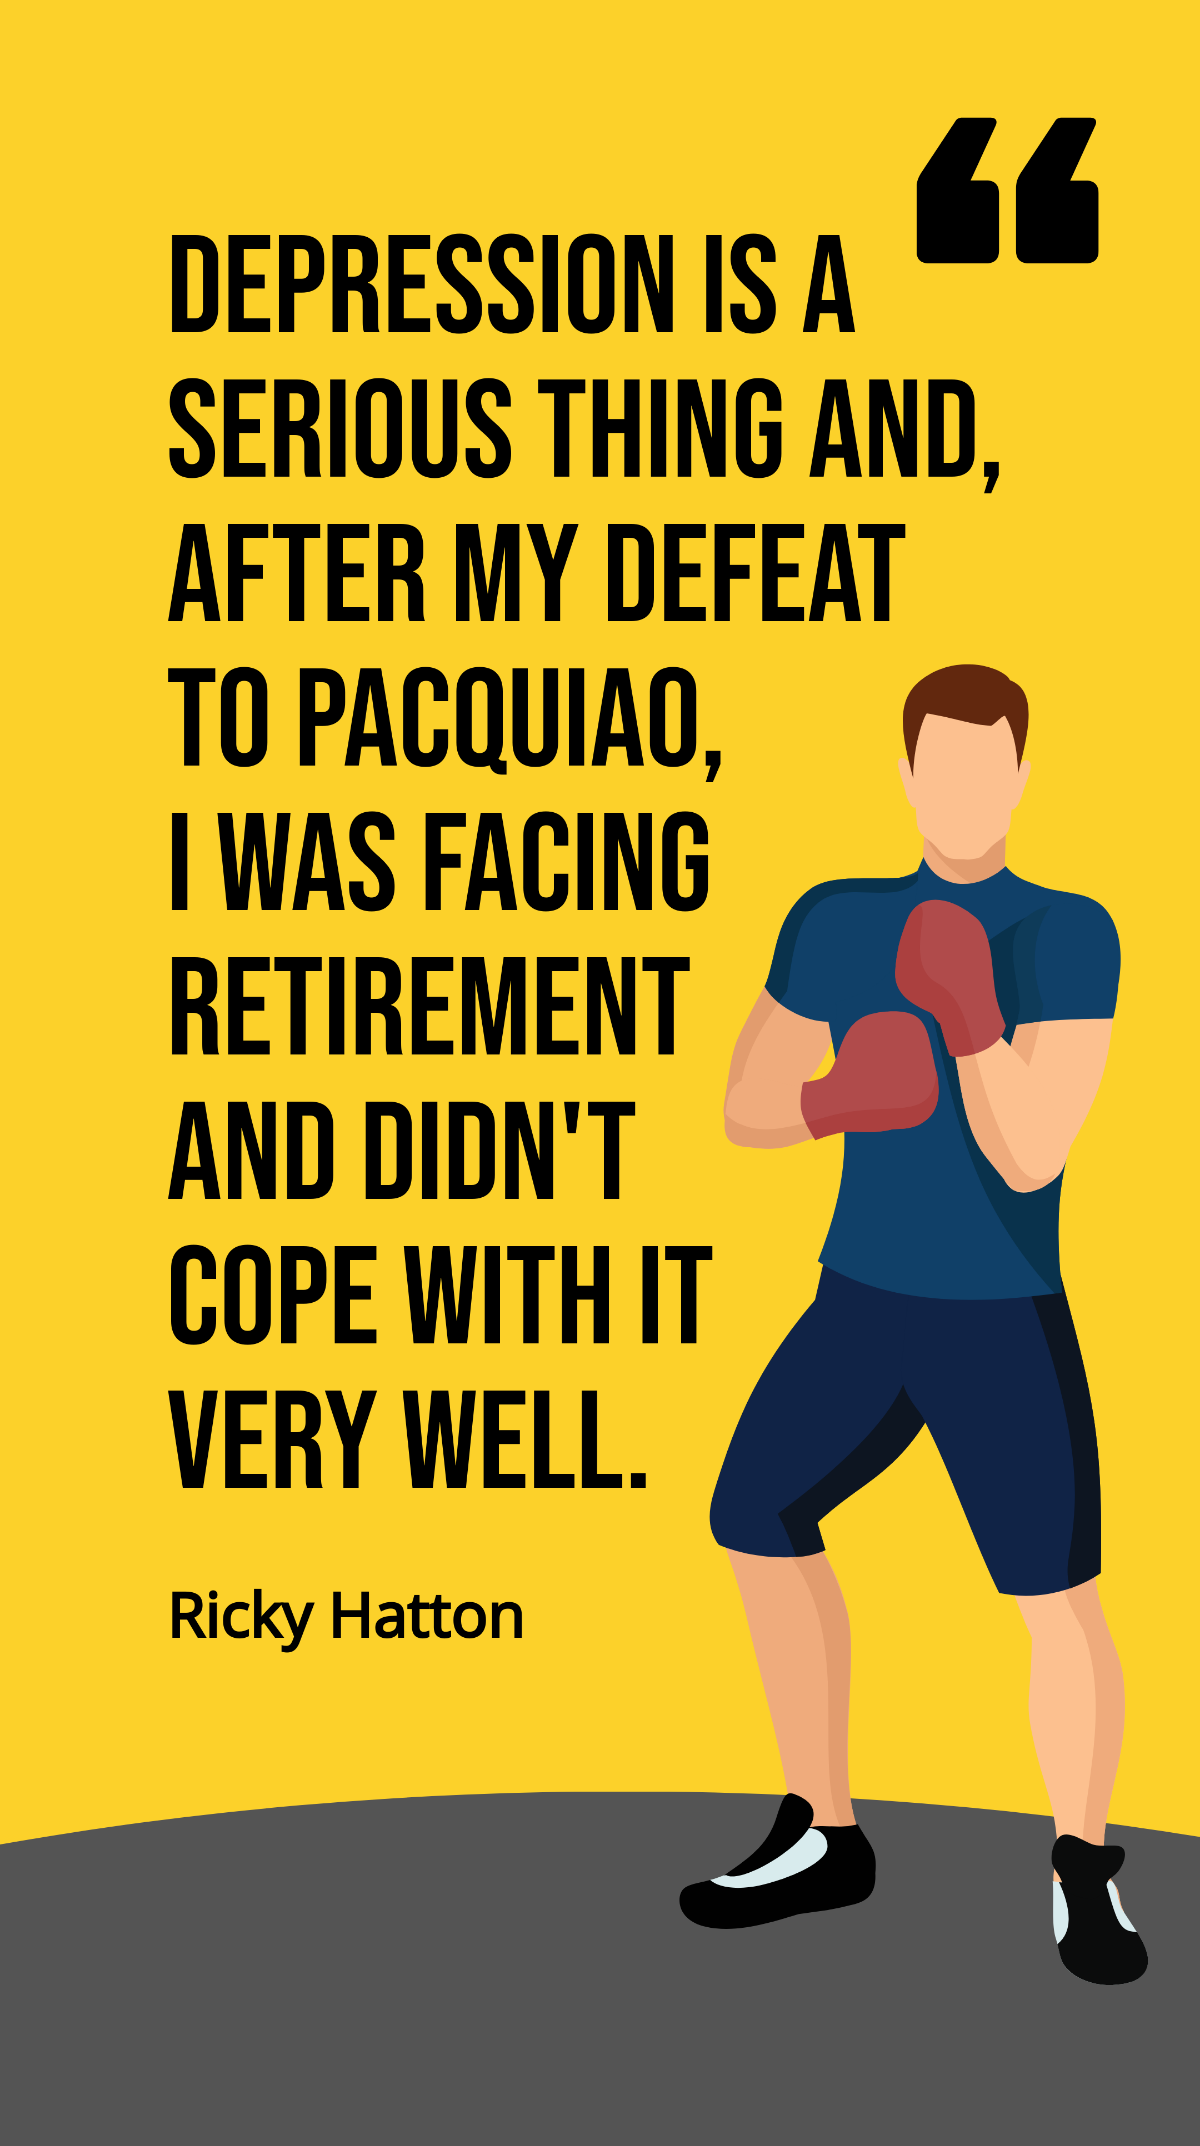 Ricky Hatton - Depression is a serious thing and, after my defeat to Pacquiao, I was facing retirement and didn't cope with it very well. Template